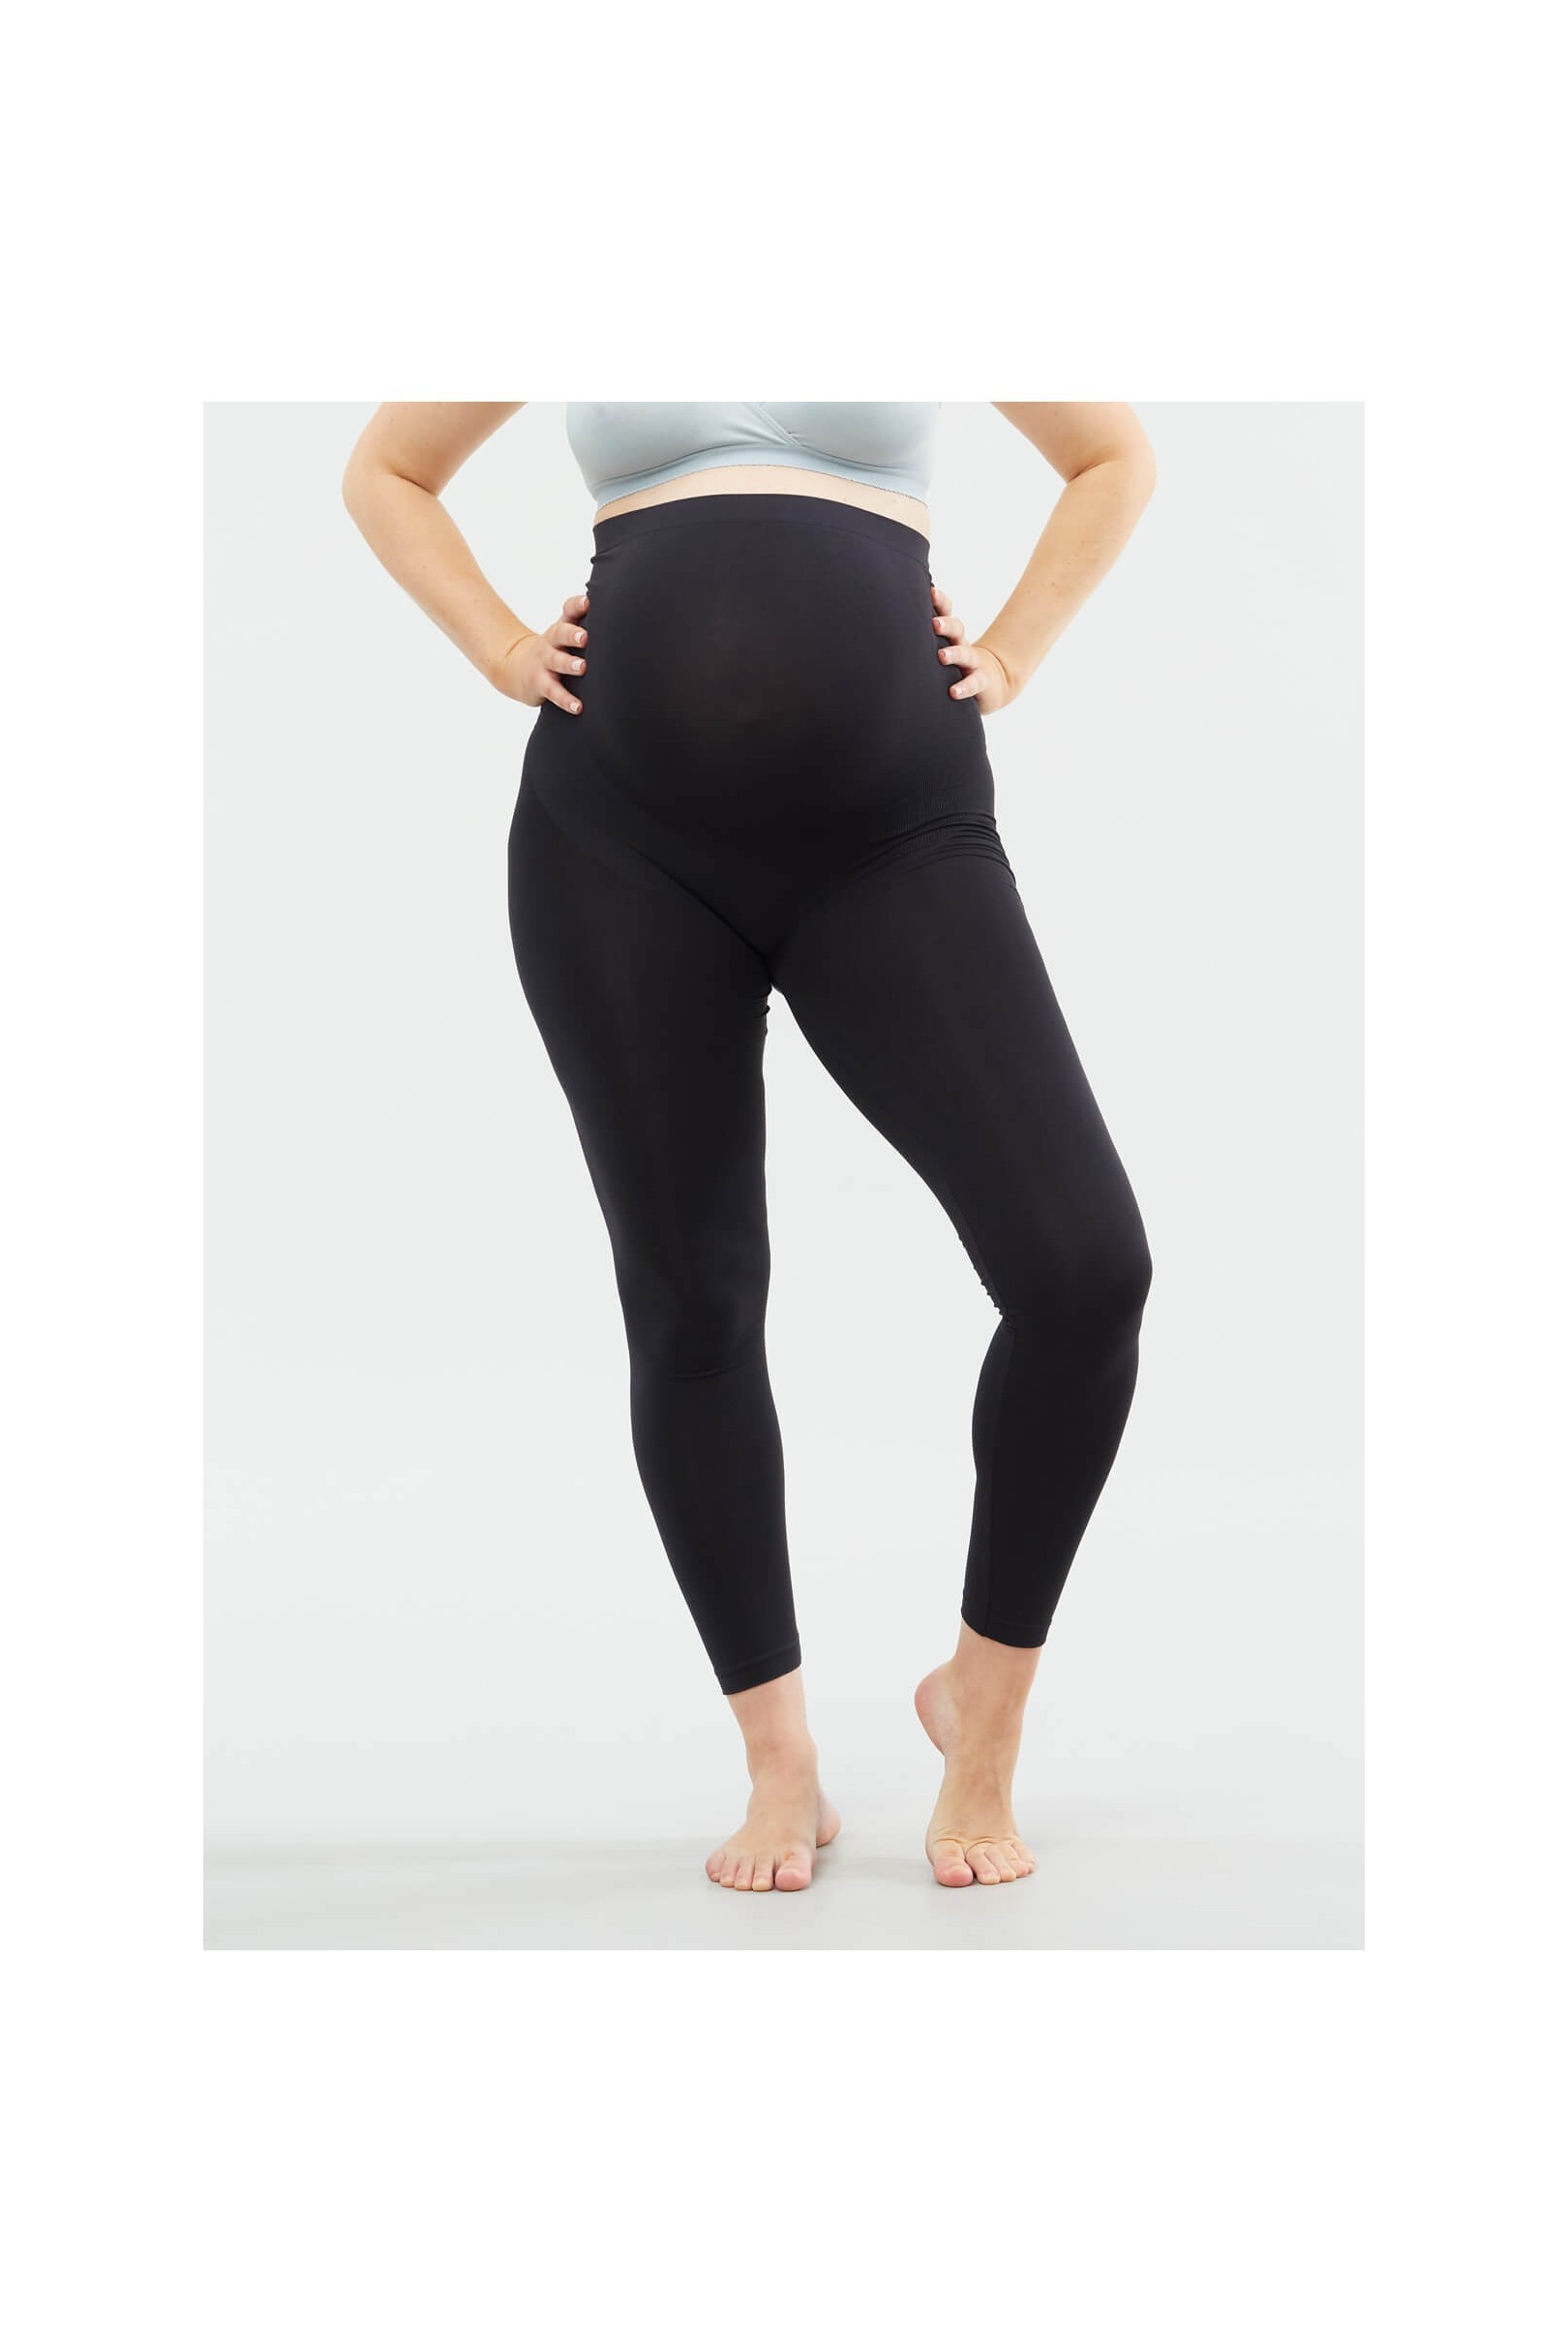 Seamless Fleece Lined Over The Belly Maternity Leggings  Maternity leggings,  Black spandex leggings, Maternity jeggings